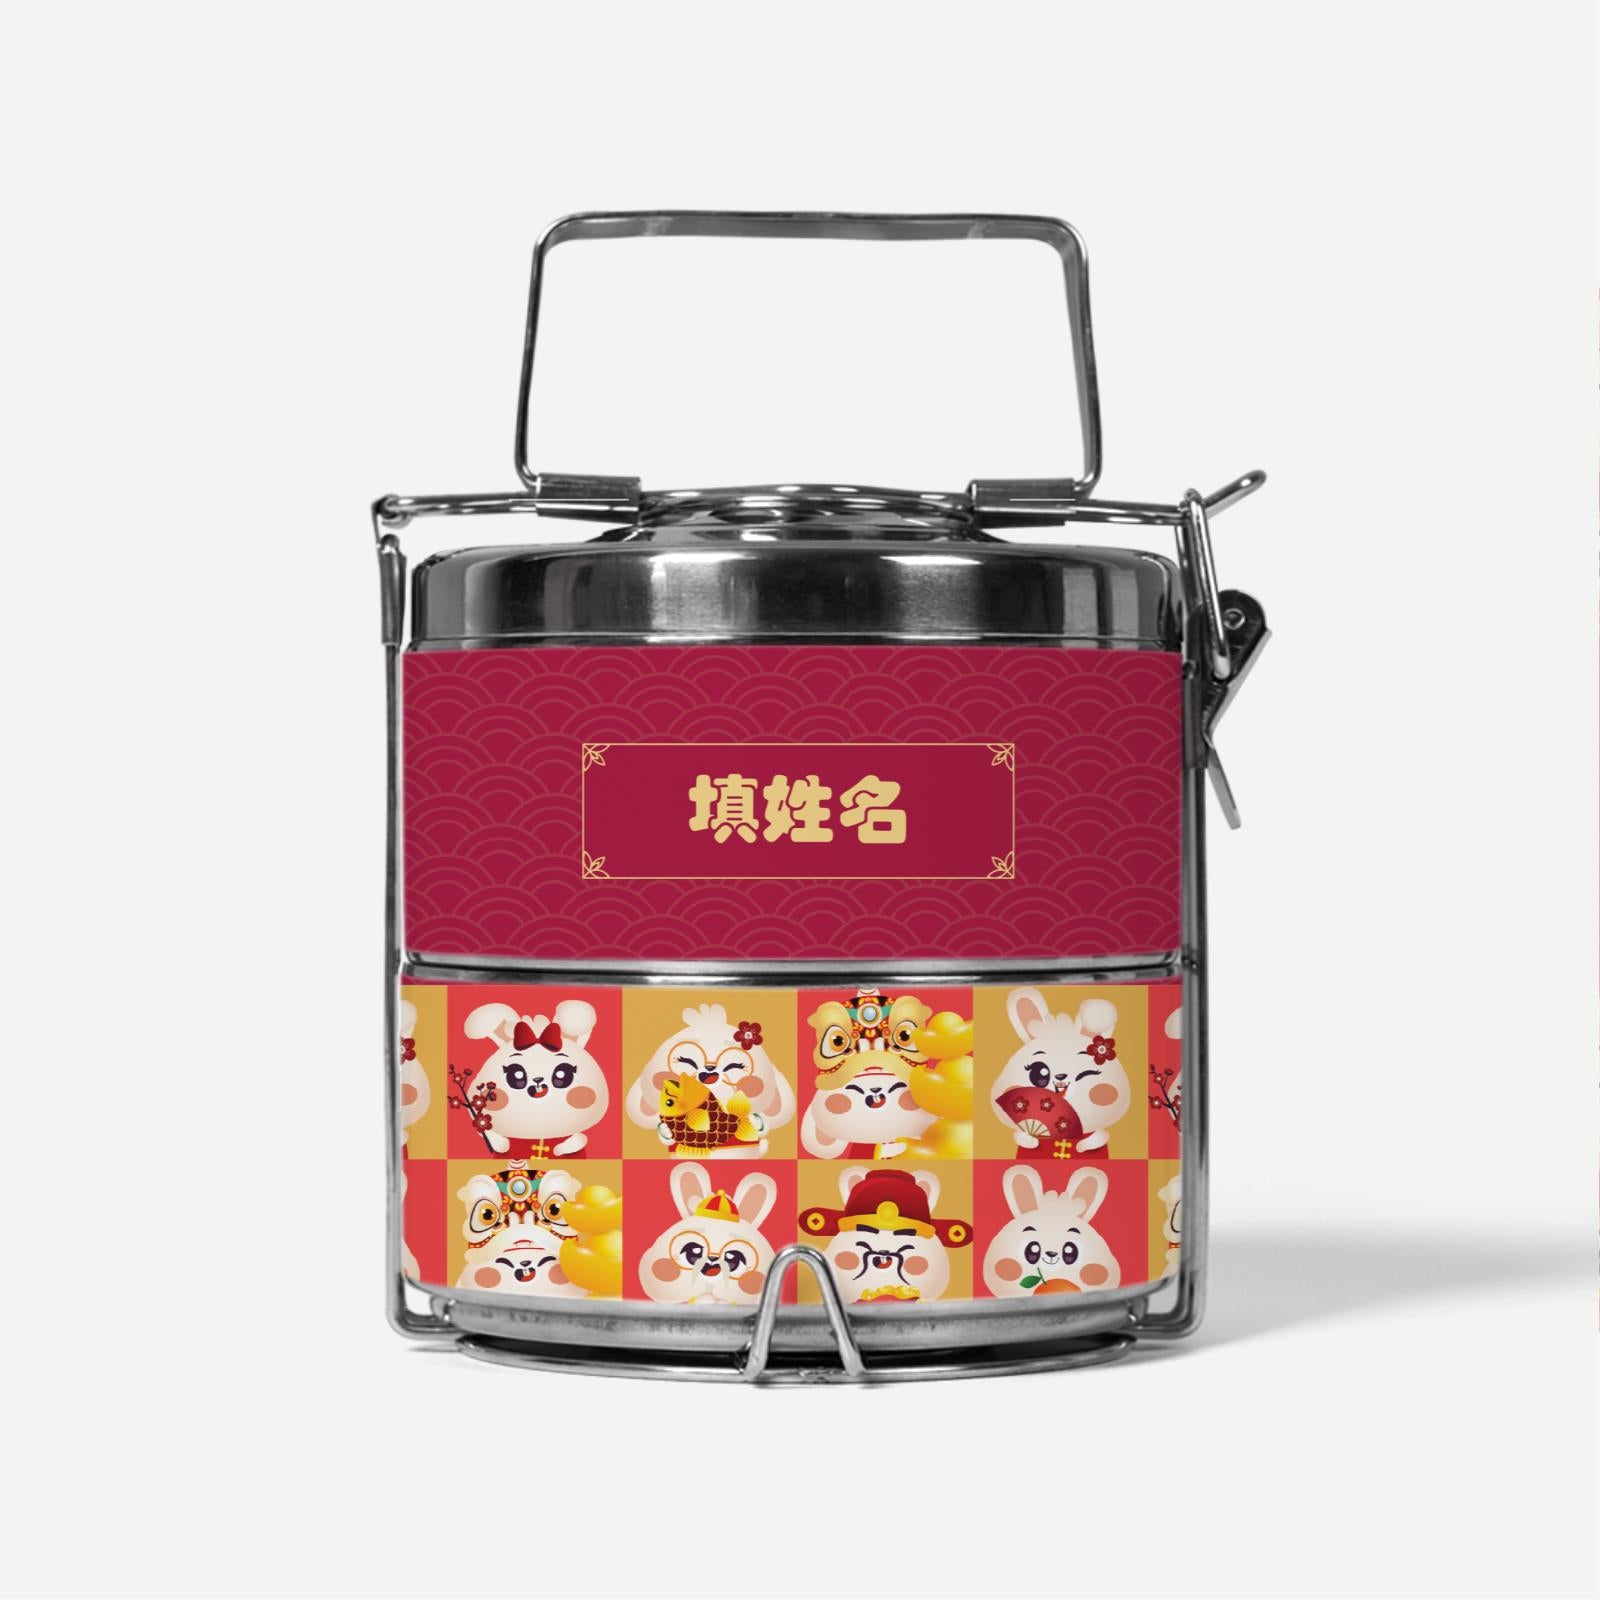 Cny Rabbit Family - Rabbit Family Red Two-Tier Premium Tififn Carrier With Chinese Personalization